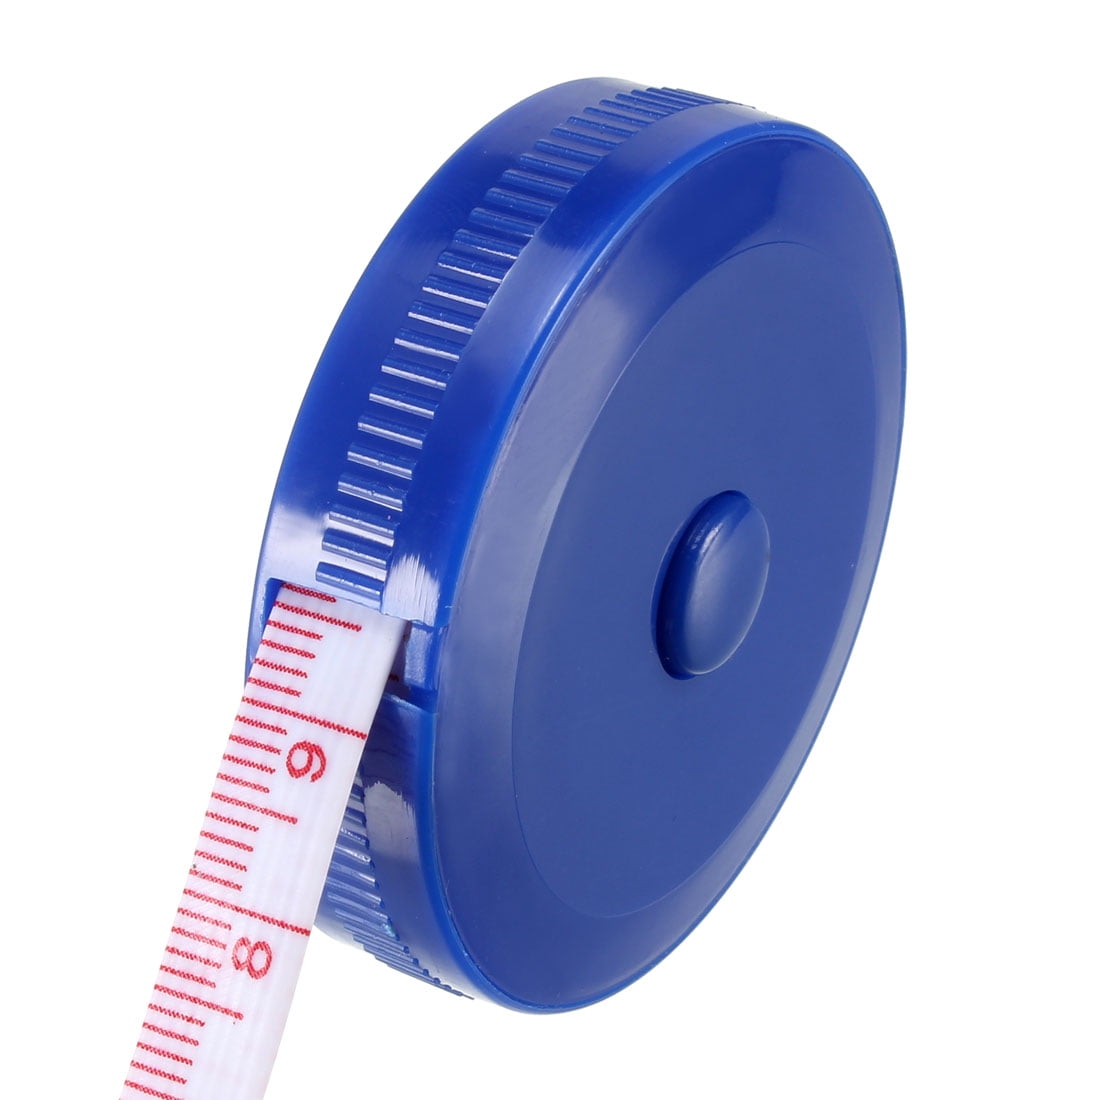 Retractable Tape Measure Pocket Tapeline Tools Measure Measure bust and waist circumference Fabric Projects or Around The House Needs 1.5 M/60 Inch Extra Long Color : A 